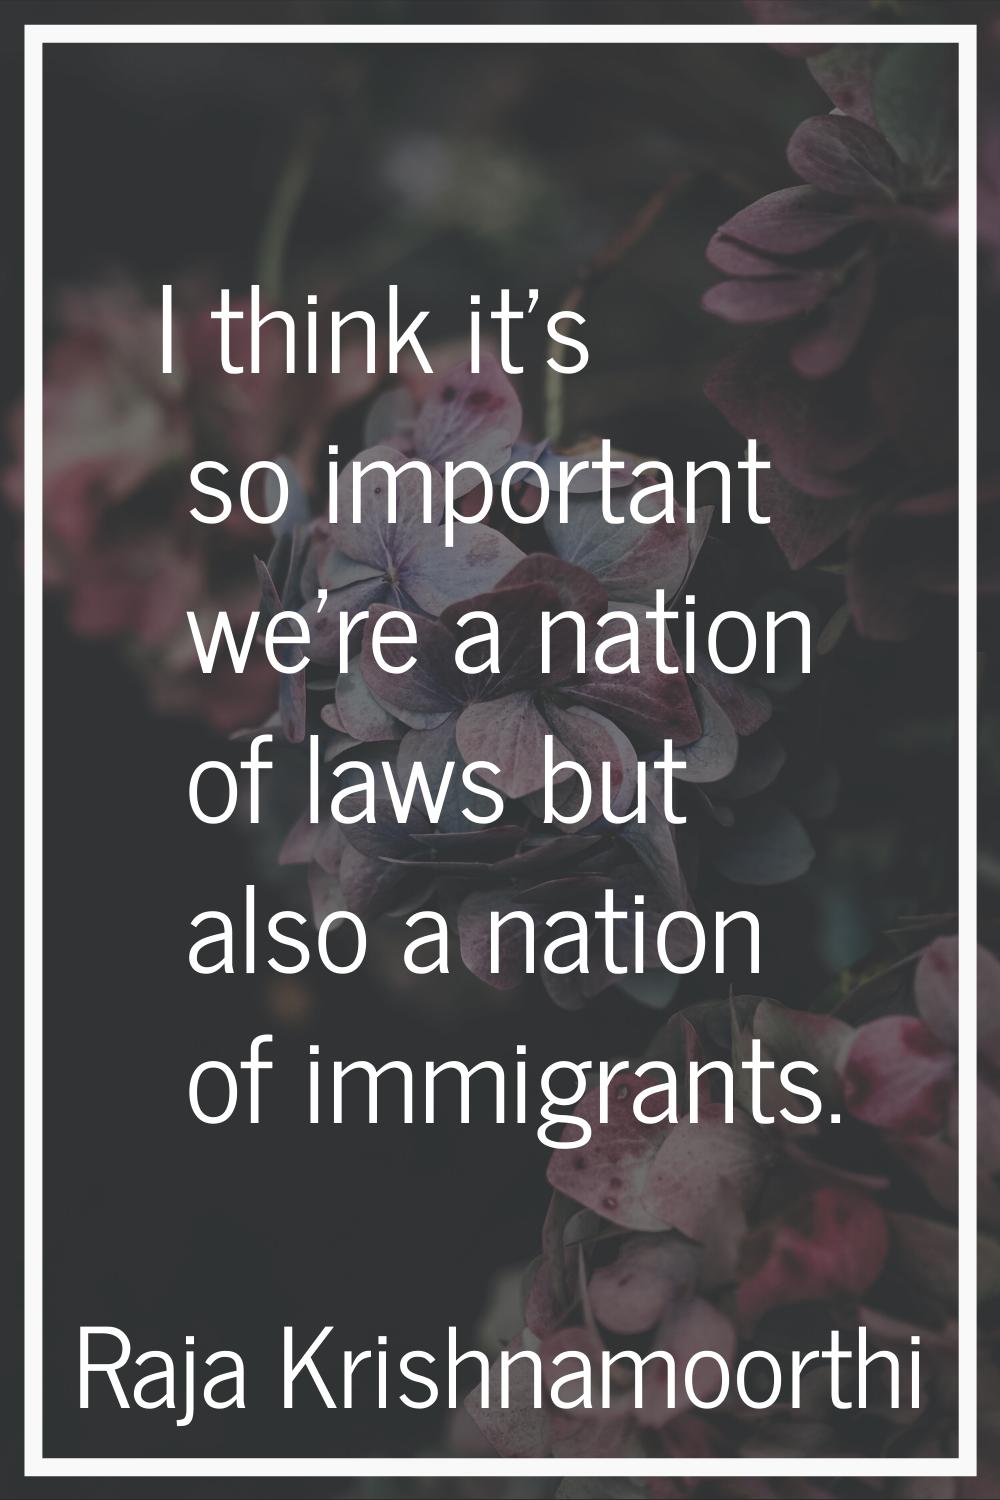 I think it's so important we're a nation of laws but also a nation of immigrants.